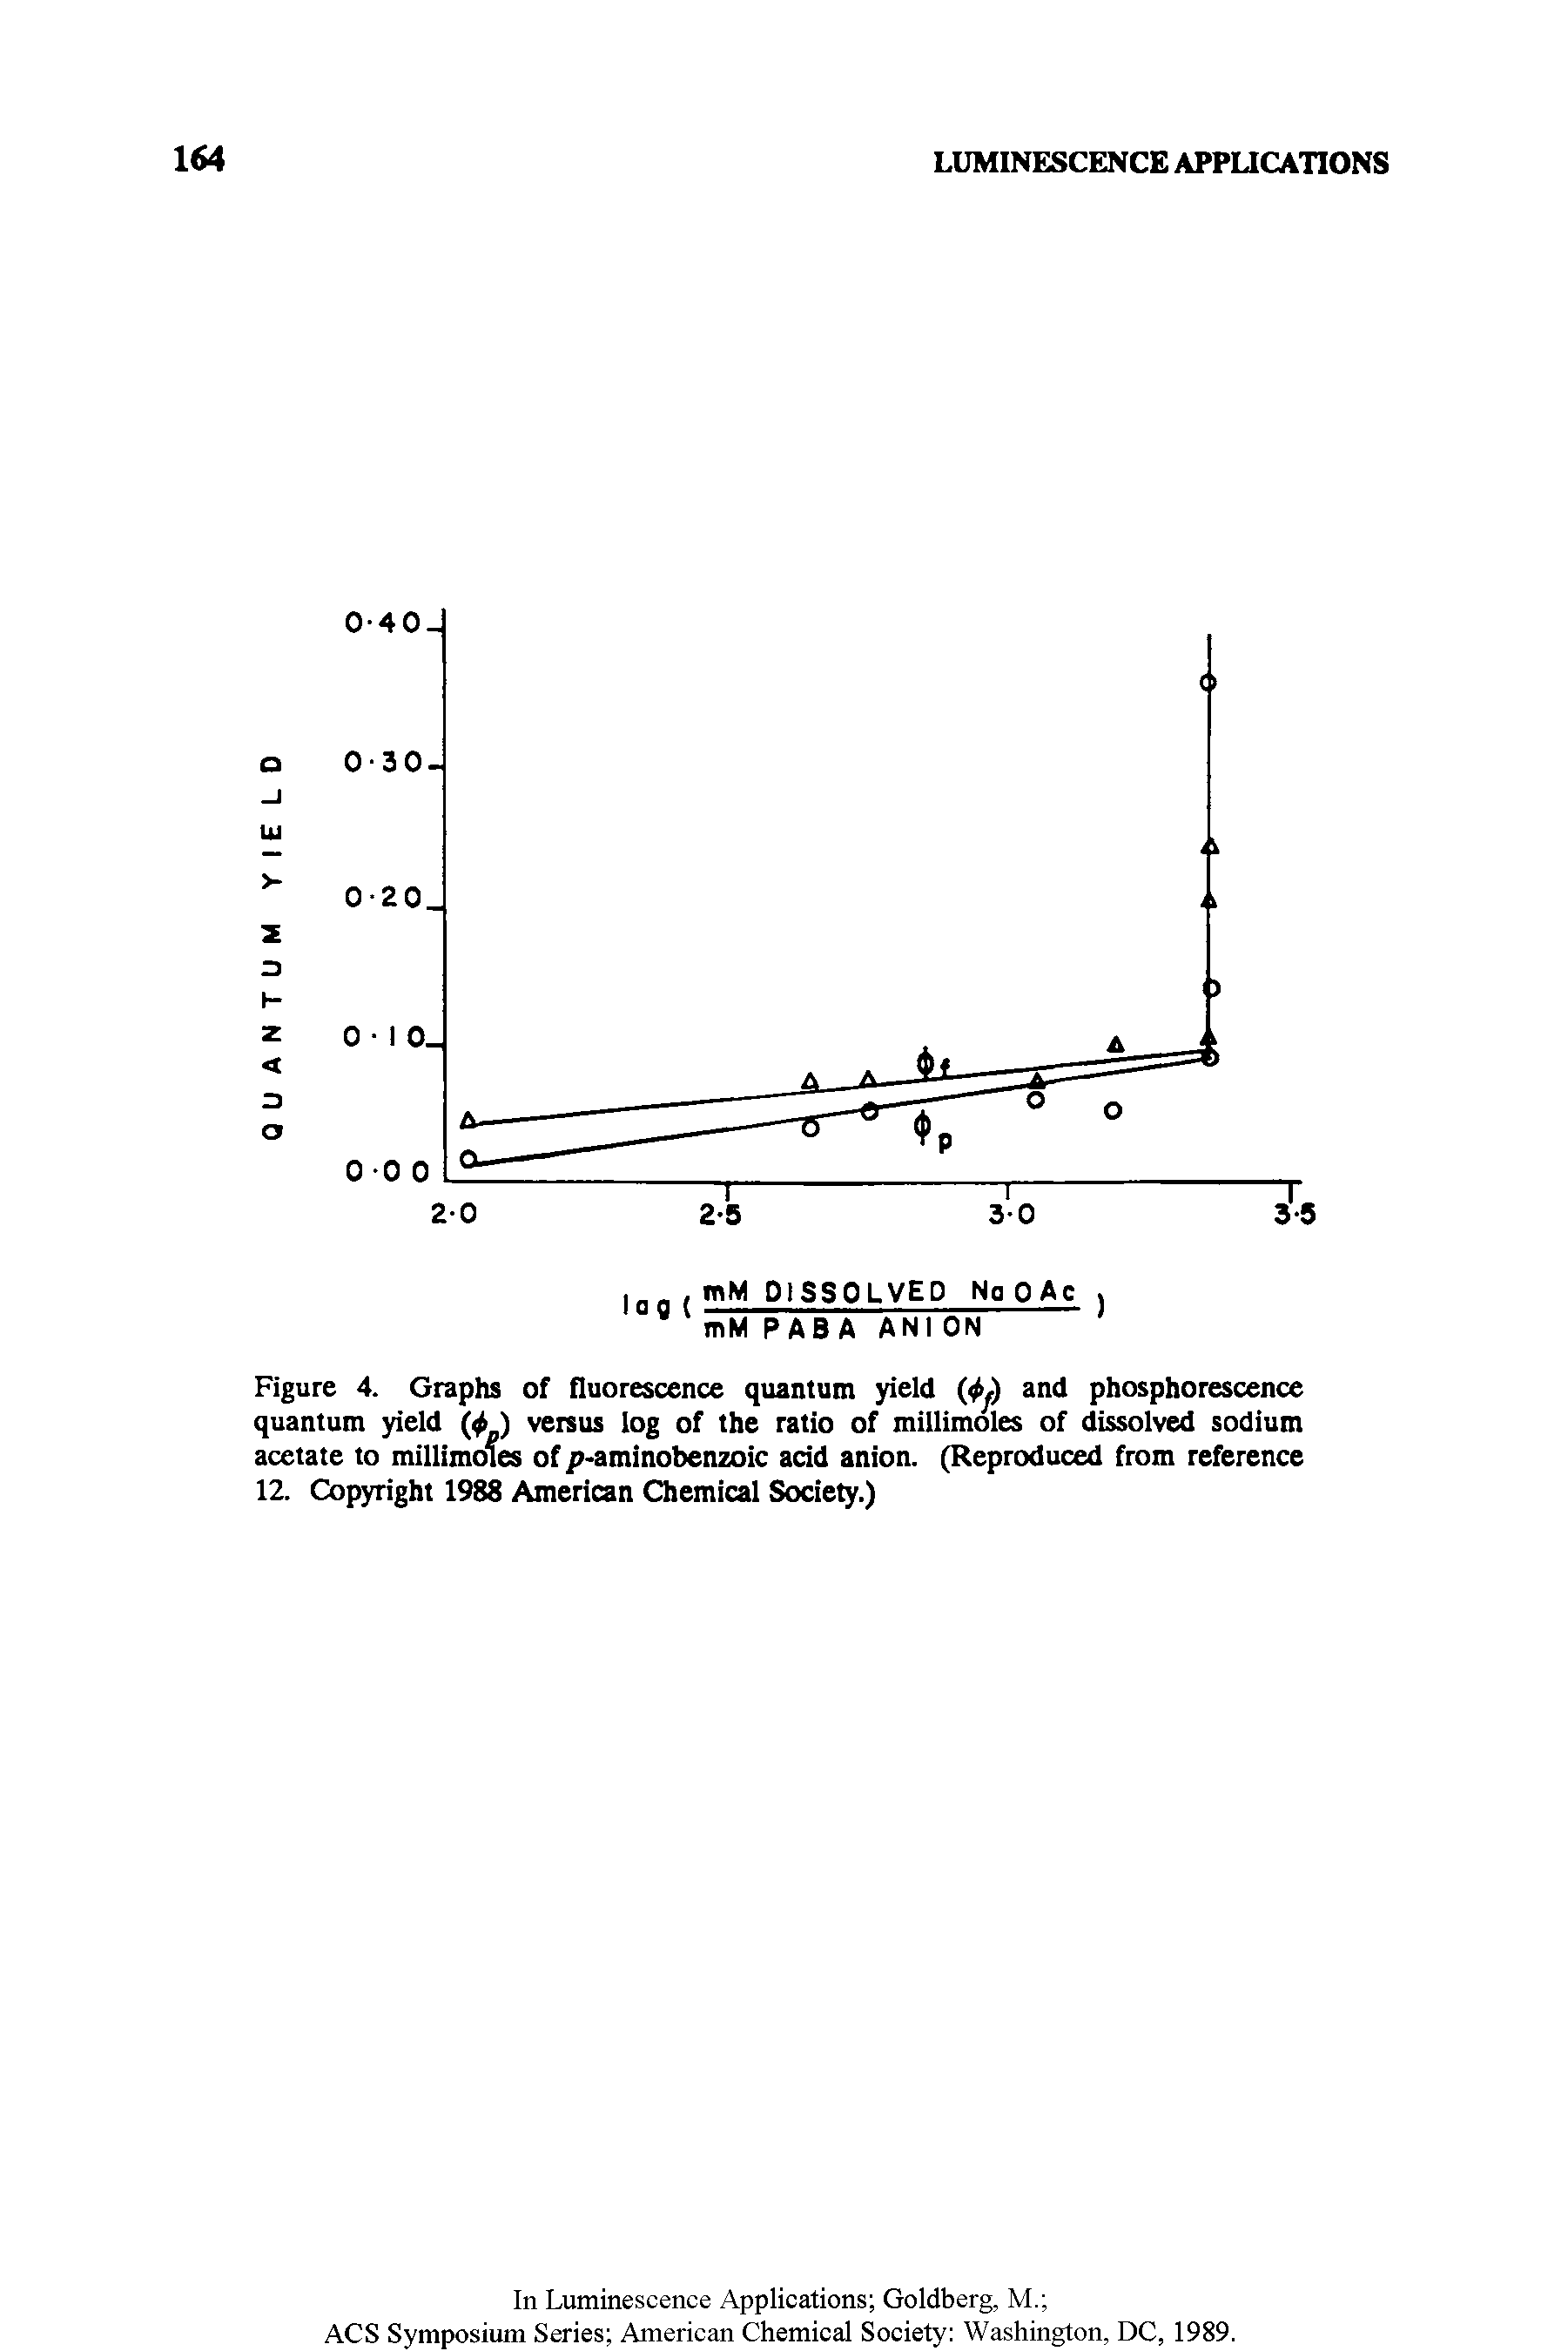 Figure 4. Graphs of fluorescence quantum yield and phosphorescence quantum yield ( ) versus log of the ratio of millimoles of dissolved sodium acetate to millimoles of p-aminobenzoic acid anion. (Reproduced from reference 12. Copyright 1988 American Chemical Society.)...